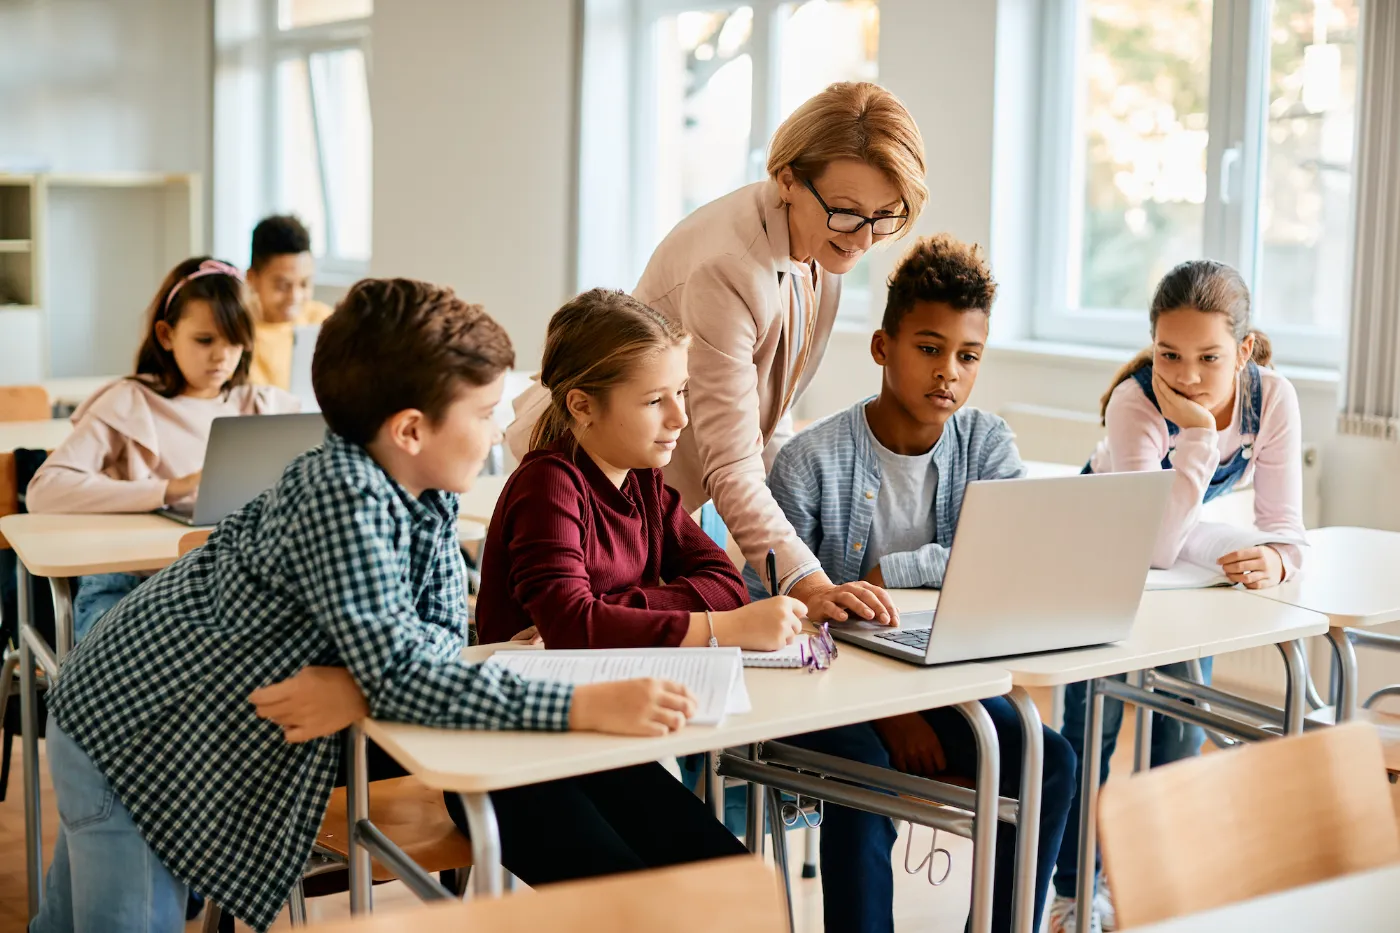 Stock image of teachers helping students on computer